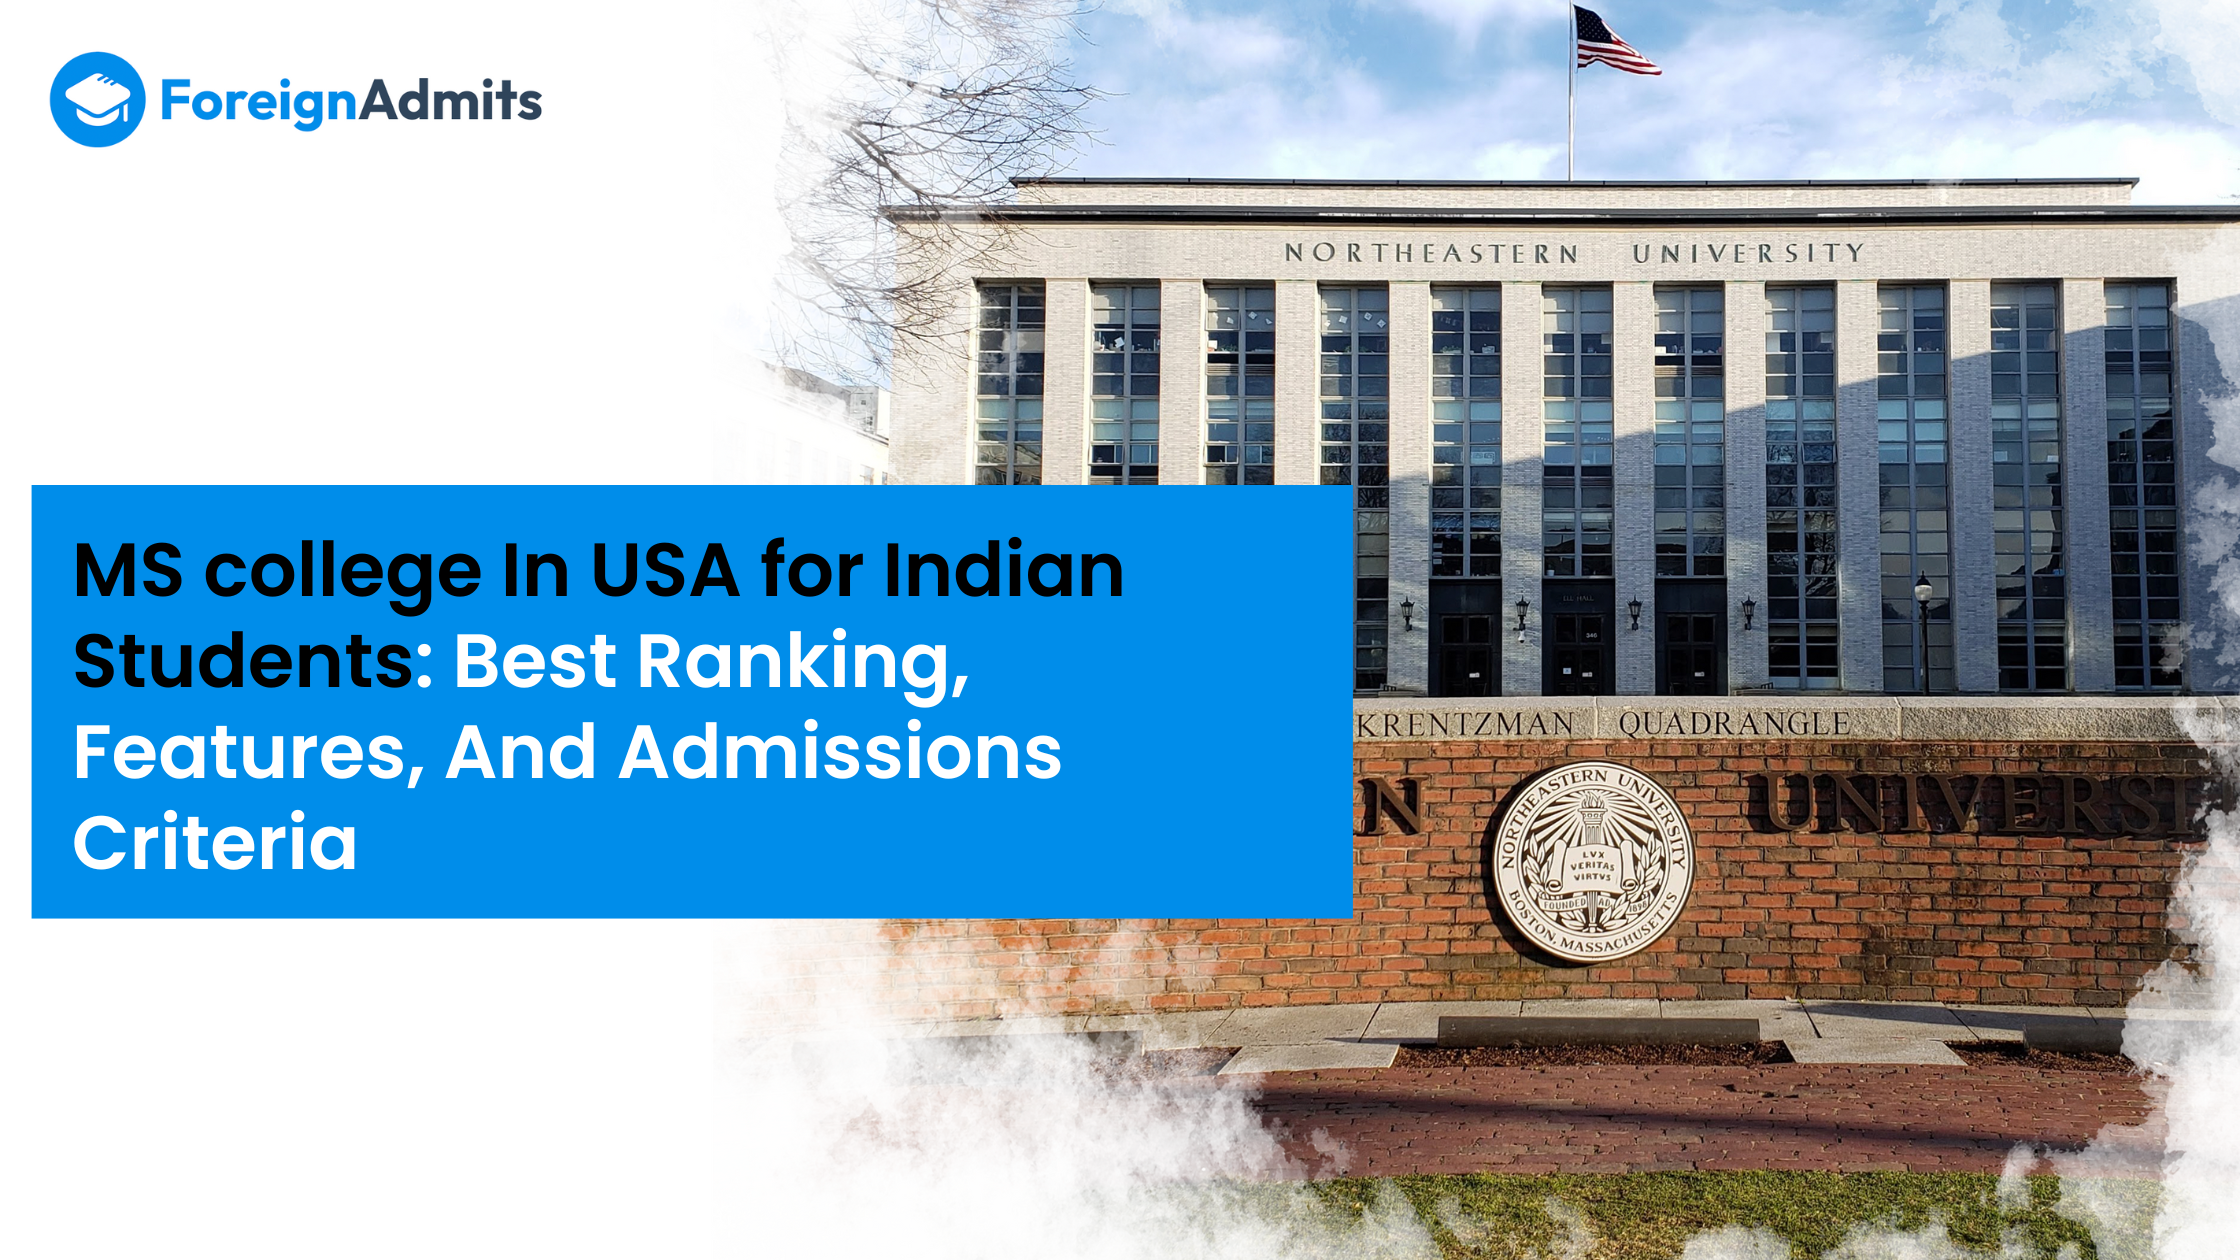 MS college In USA for Indian Students: Best Ranking, Features, And Admissions Criteria